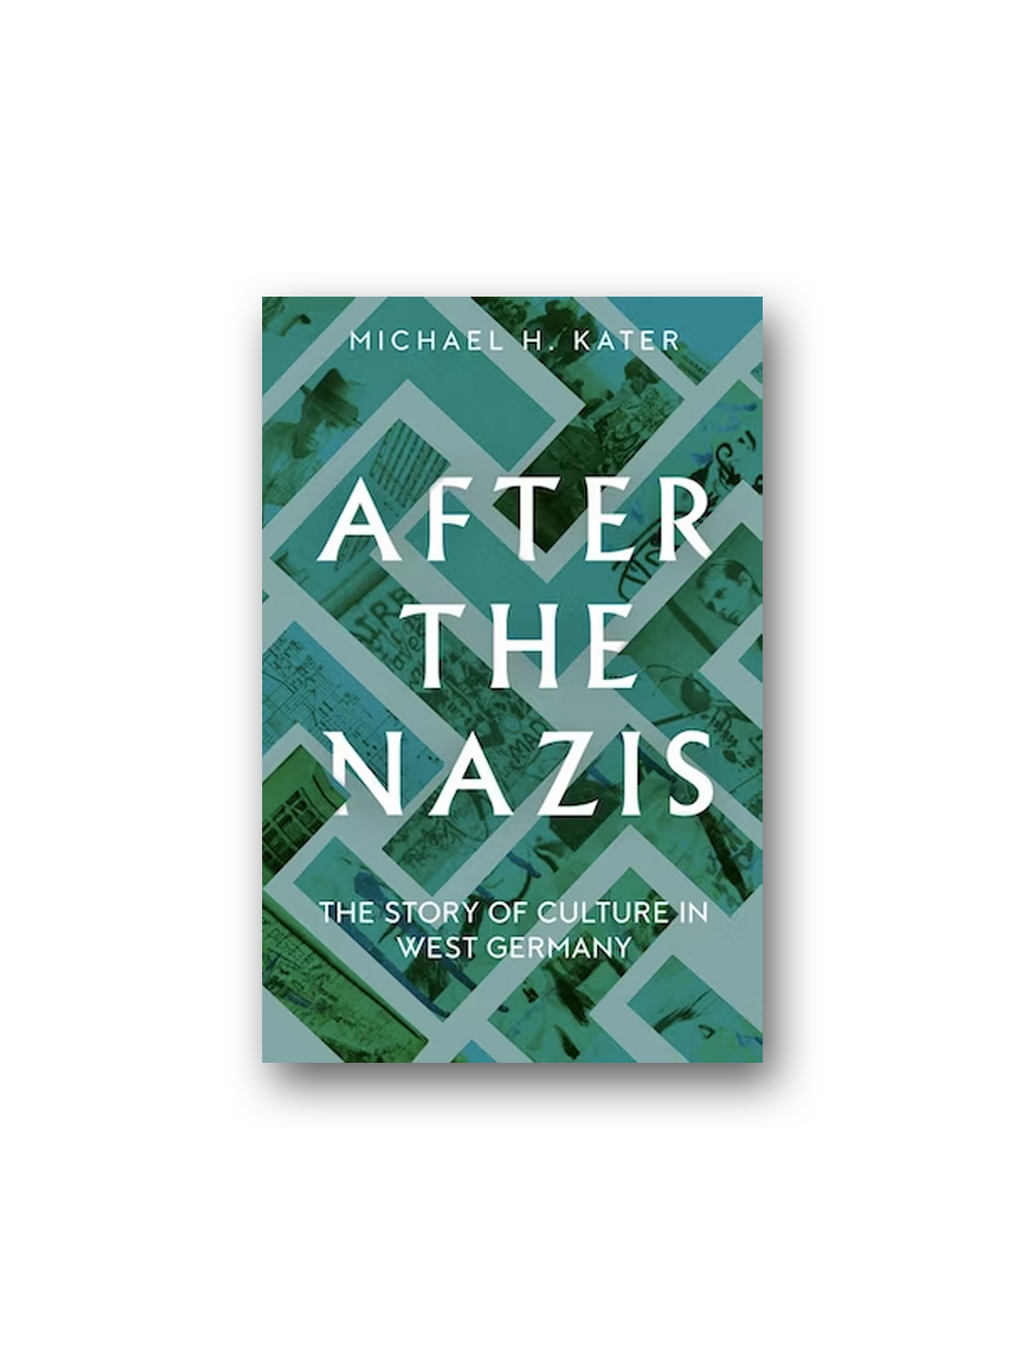 After the Nazis